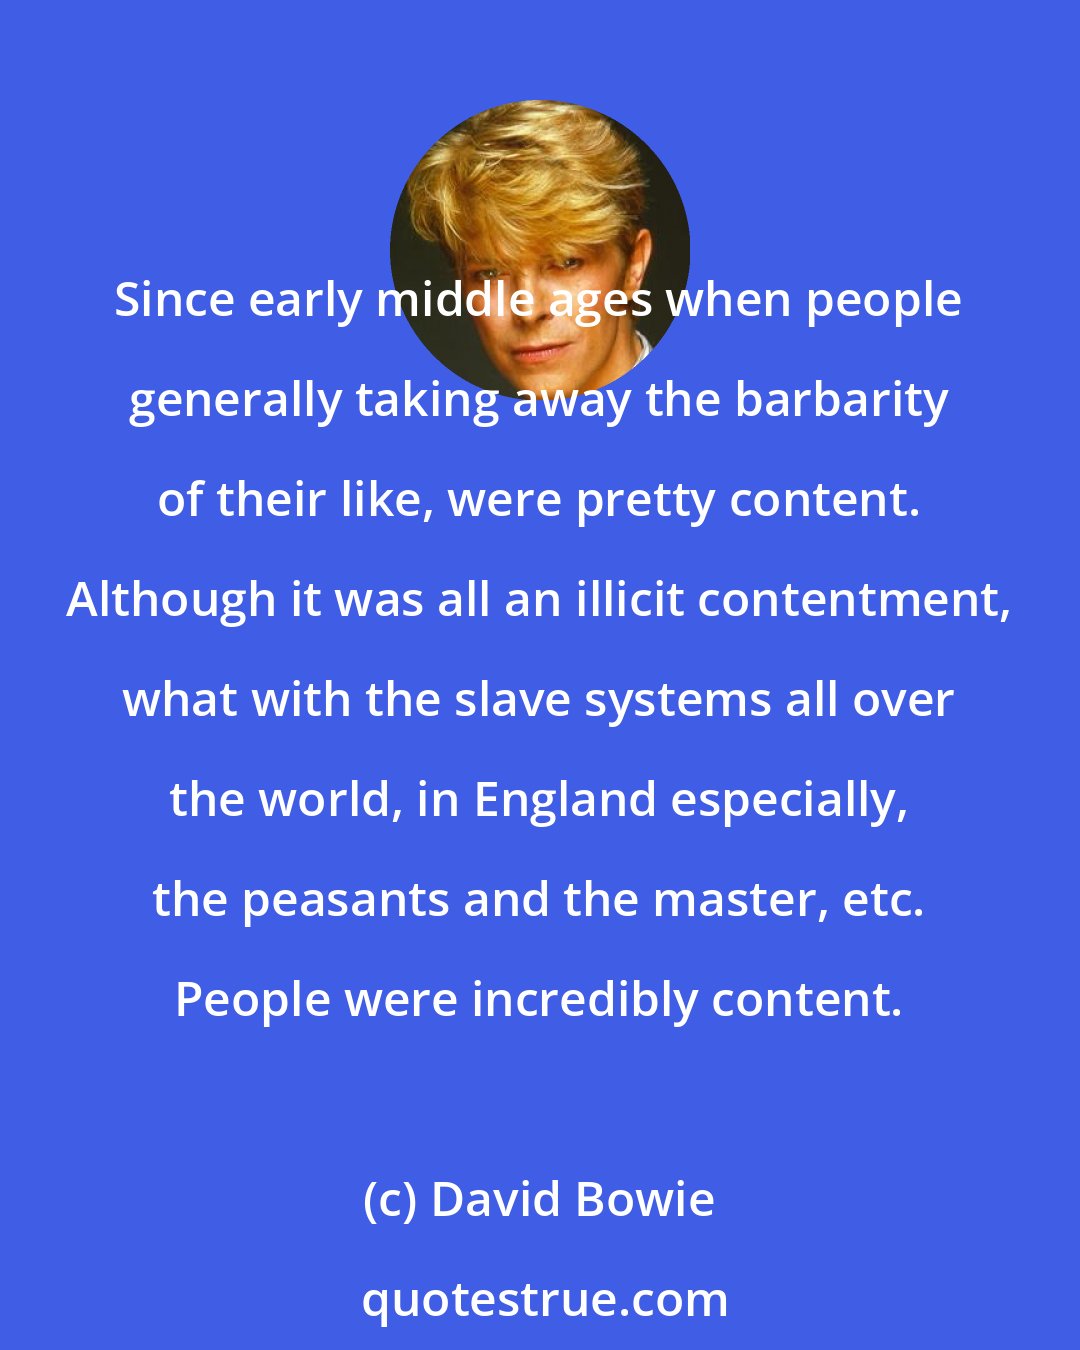 David Bowie: Since early middle ages when people generally taking away the barbarity of their like, were pretty content. Although it was all an illicit contentment, what with the slave systems all over the world, in England especially, the peasants and the master, etc. People were incredibly content.